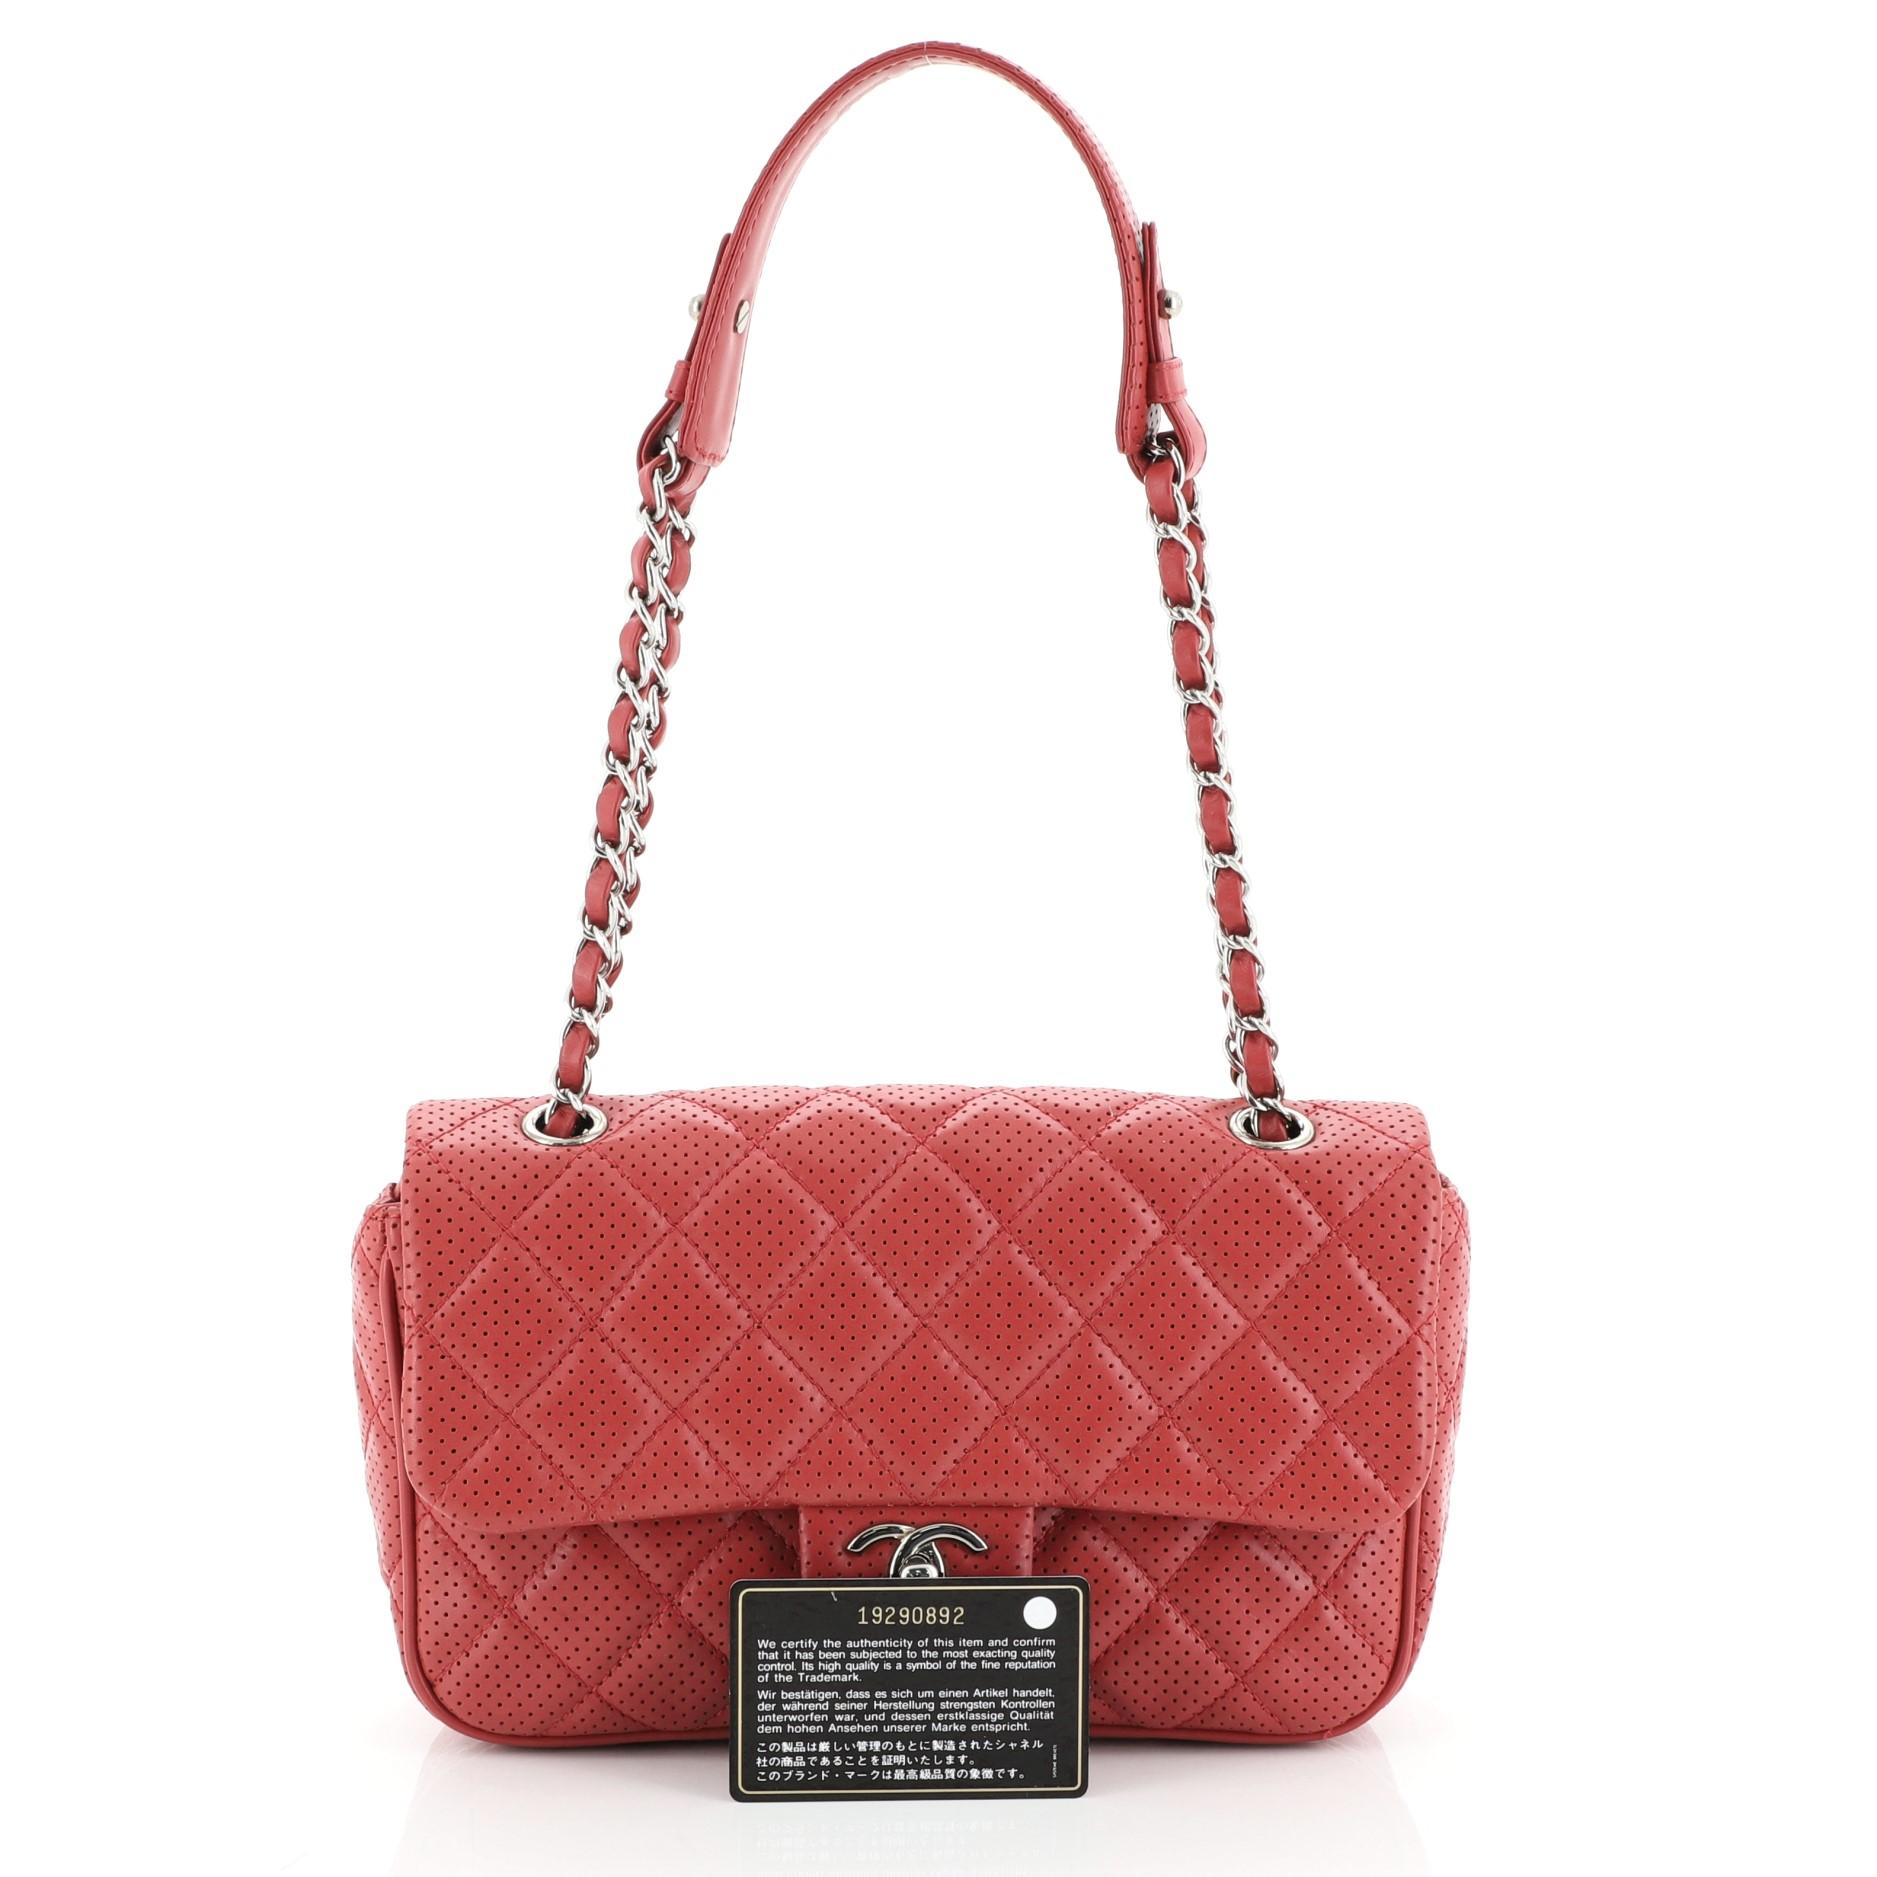 This Chanel Punch Flap Bag Quilted Perforated Lambskin Medium, crafted in red quilted perforated leather, features woven-in leather chain strap, exterior back pocket and gunmetal-tone hardware. Its turn-lock closure opens to a neutral fabric